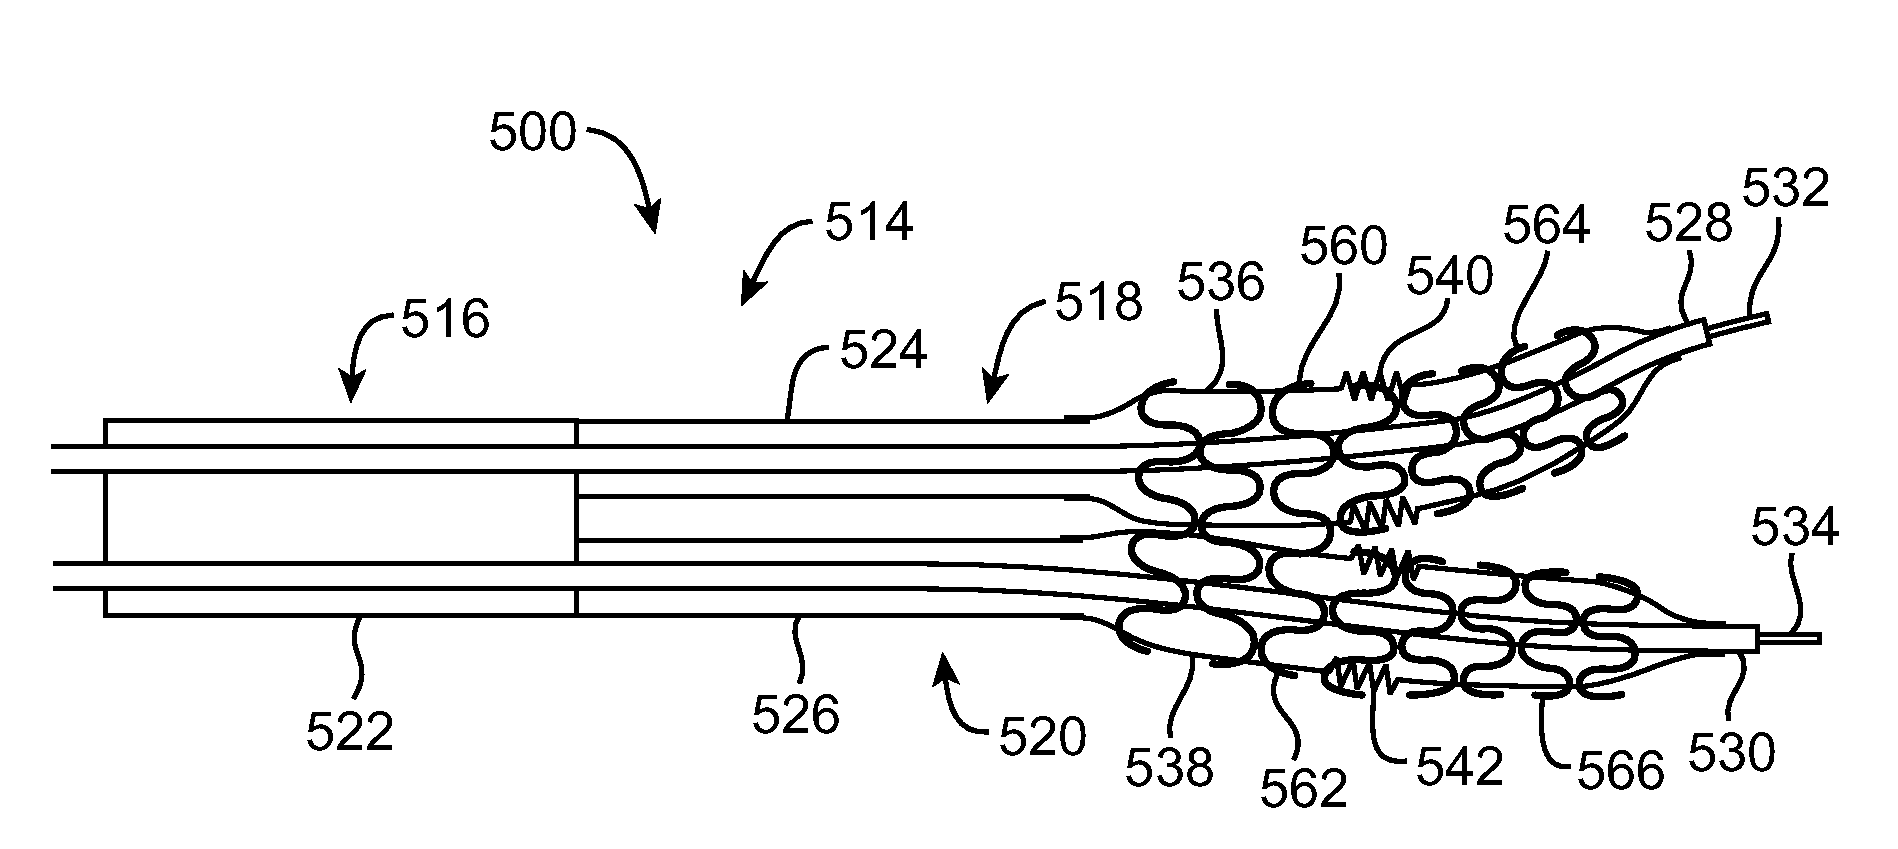 Bifurcated Stent With Variable Length Branches